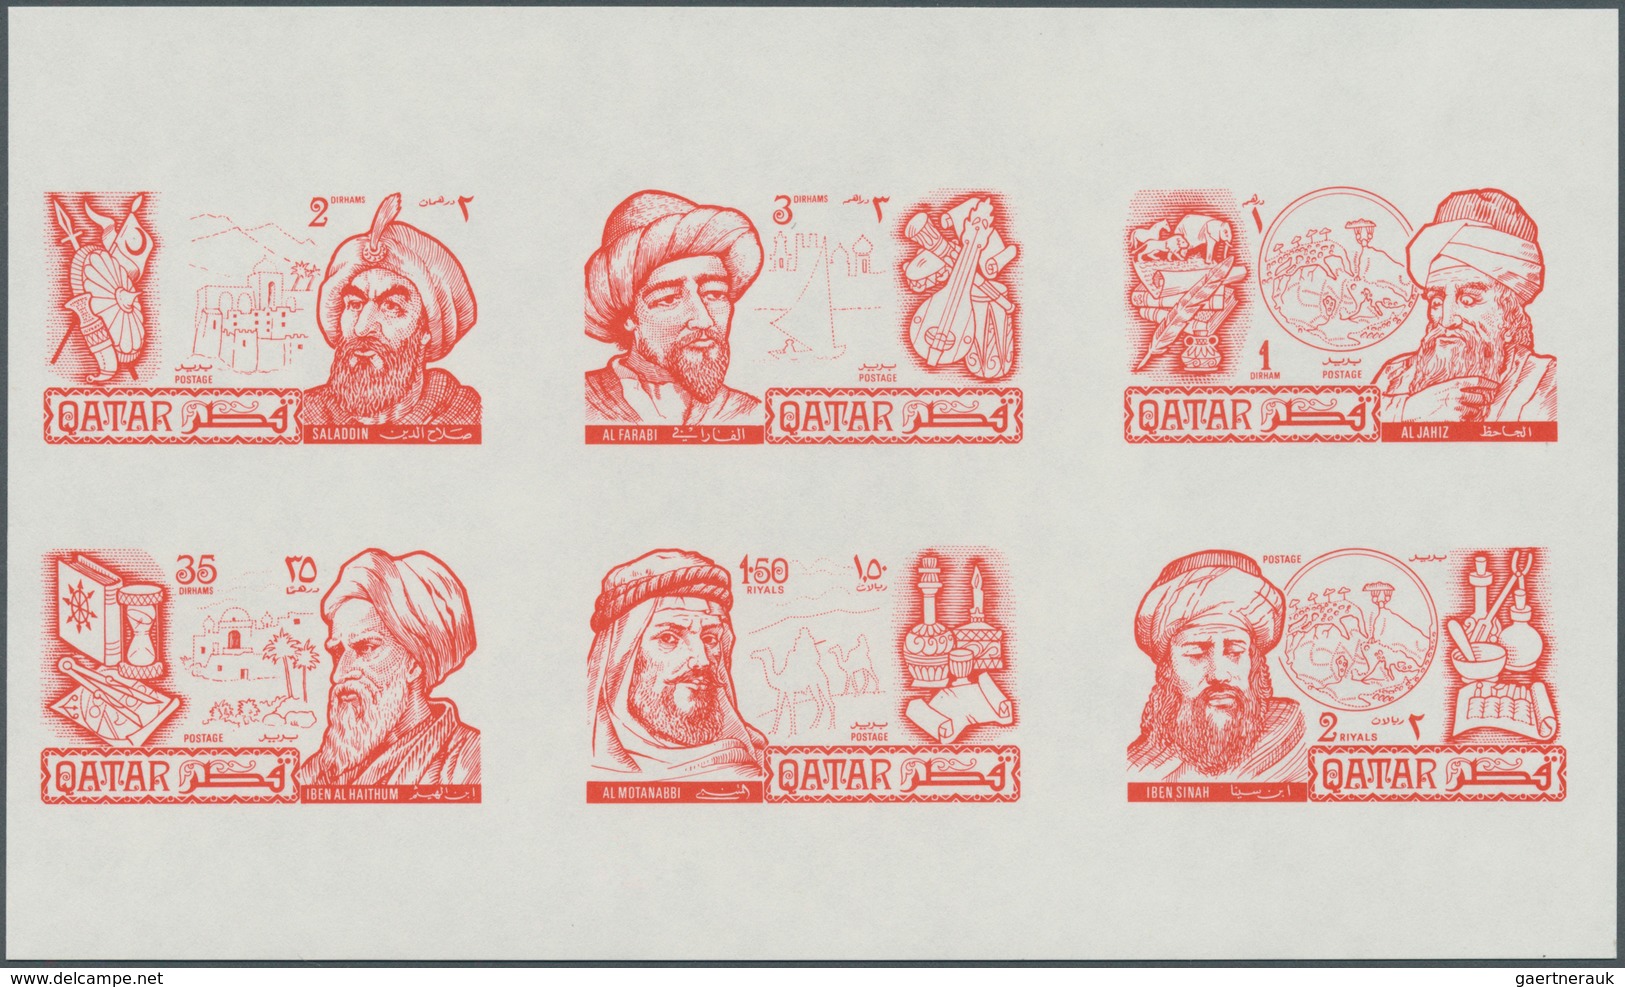 09204 Katar / Qatar: 1971, Famous Persons Of Islam, 1d. To 2r., Complete Set Of Six Value, Imperforate Pro - Qatar